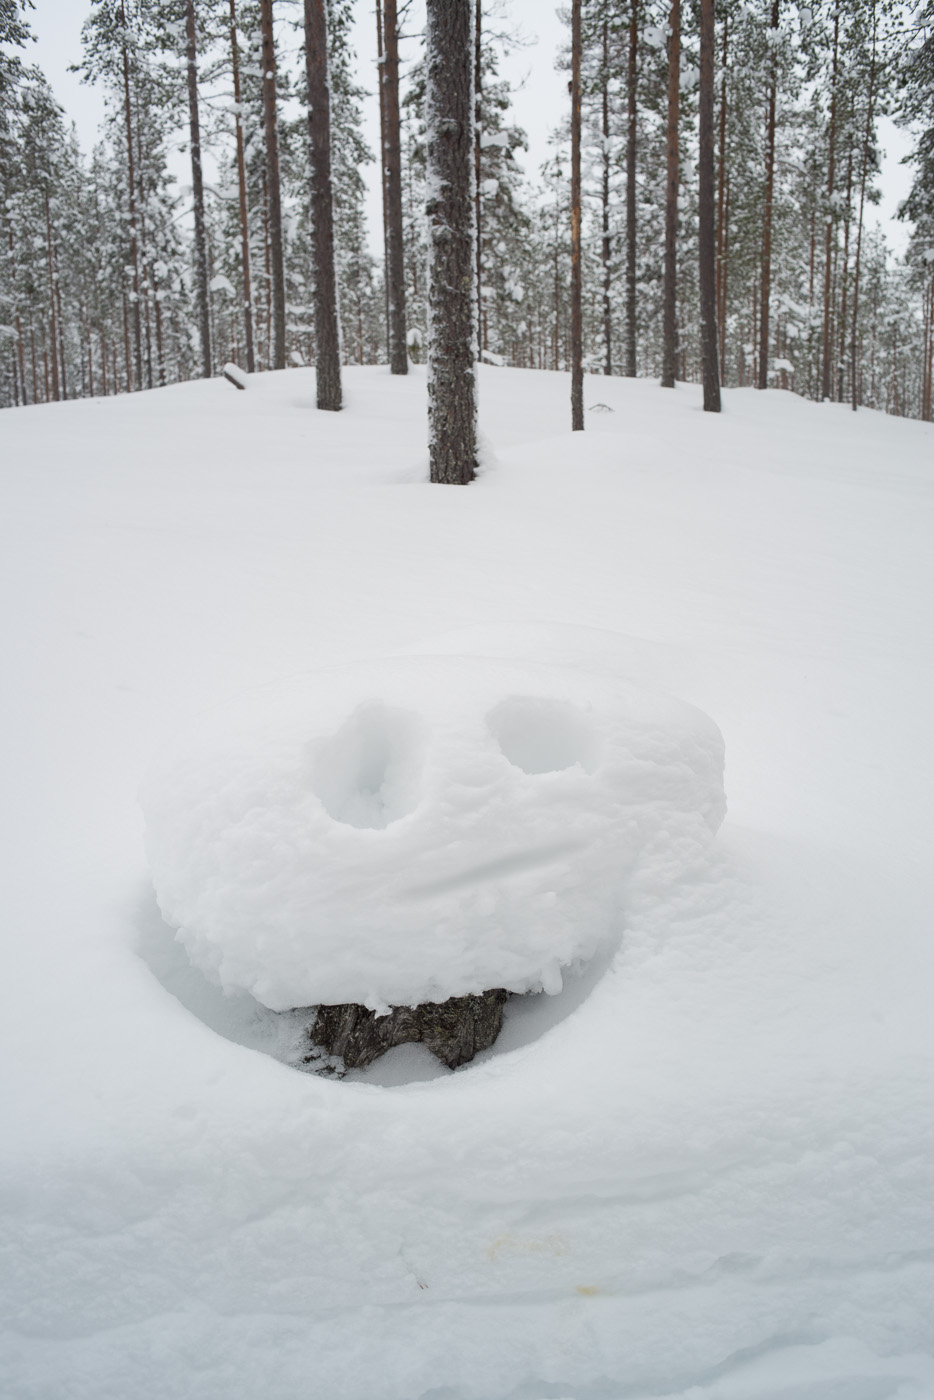 A smiling face drawn in the snow in Lapland. Nikon D800e and Leica-R 35 Summicron